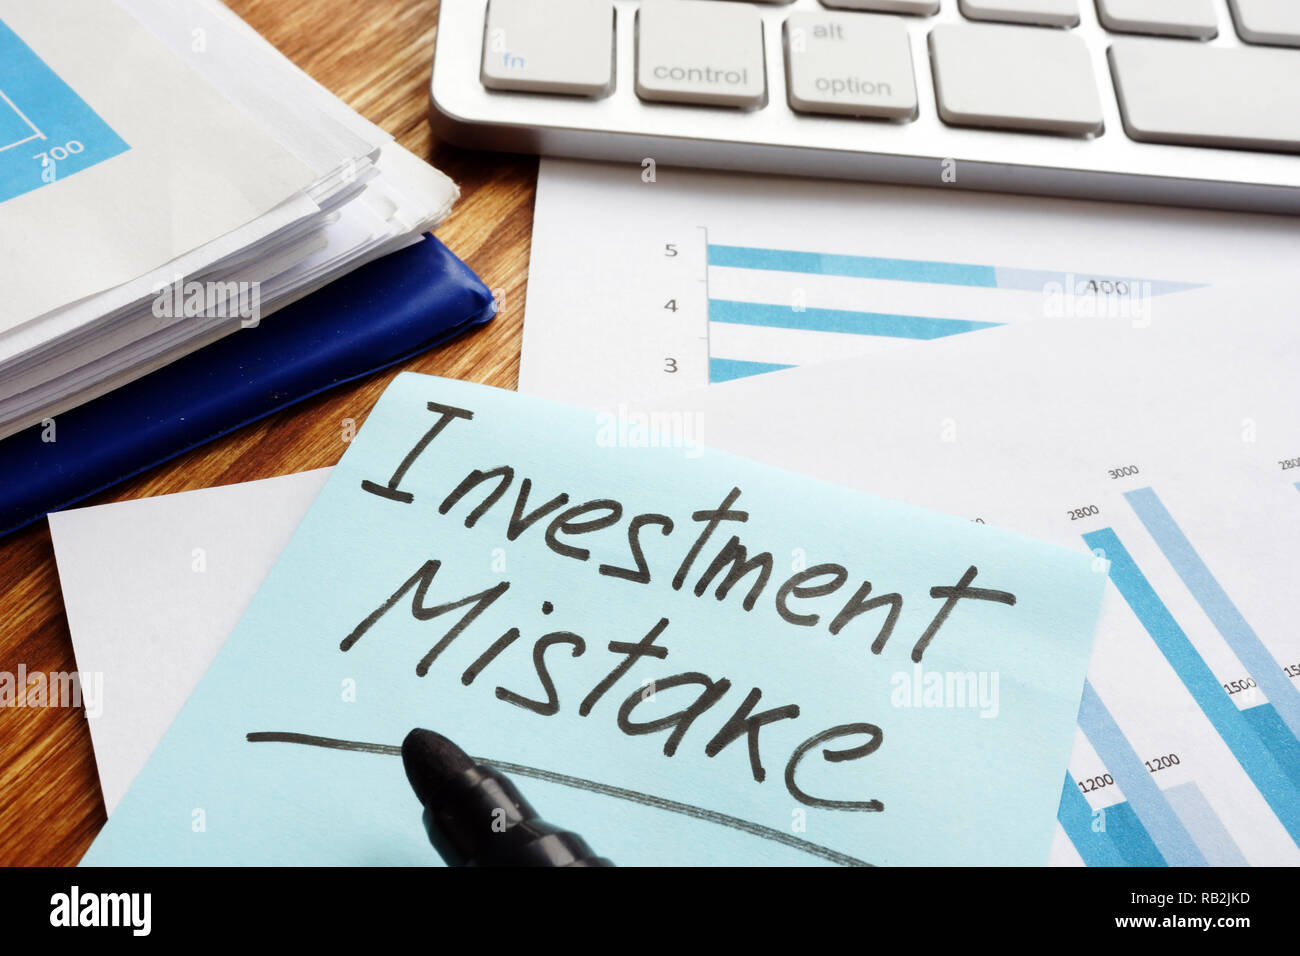 Investment Mistake written on a financial documents. Stock Photo